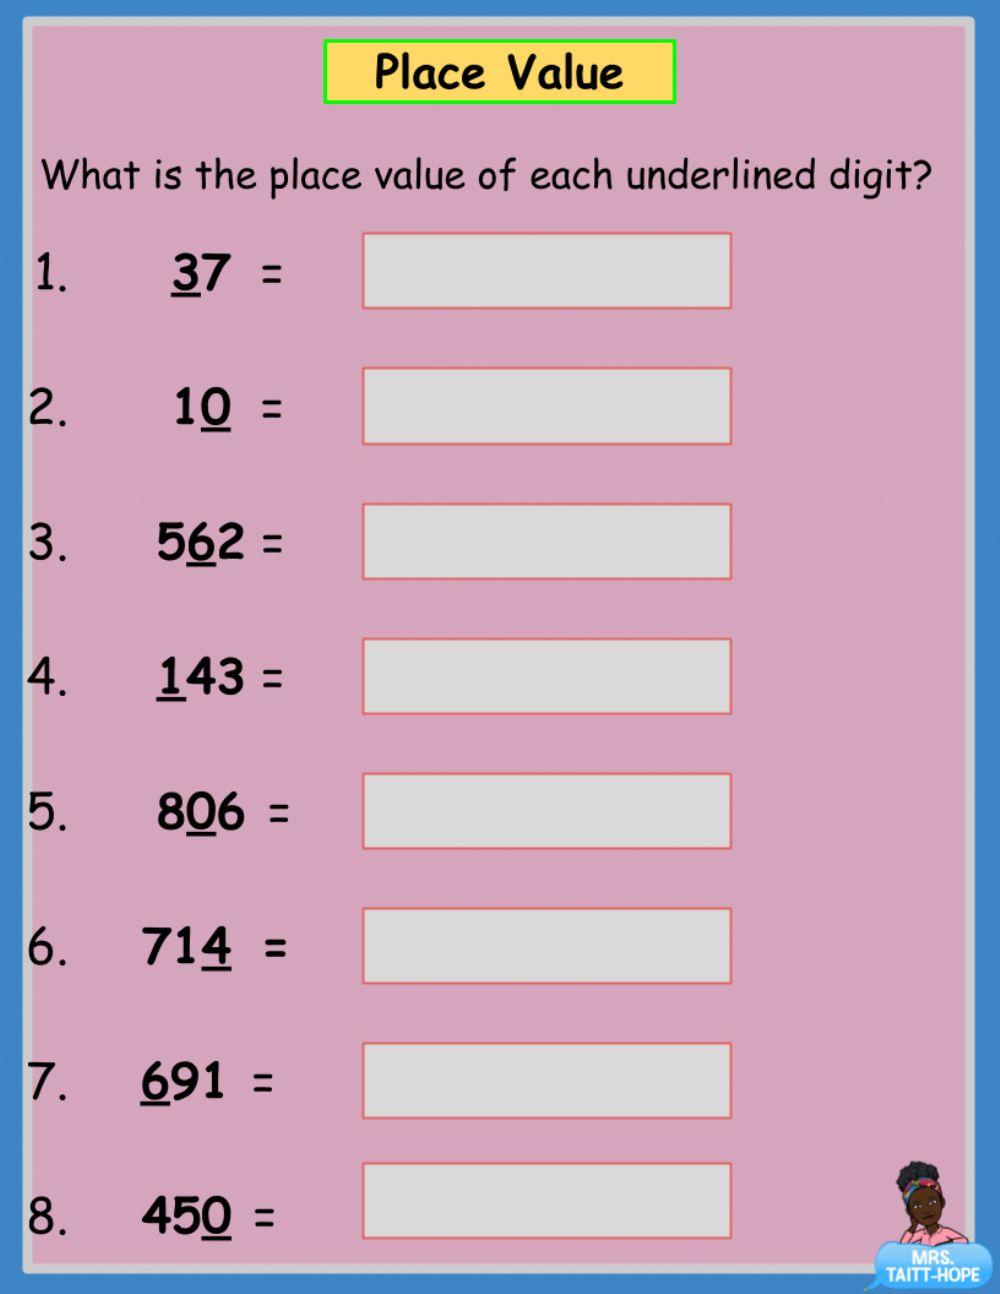 Place Value of Digits 1